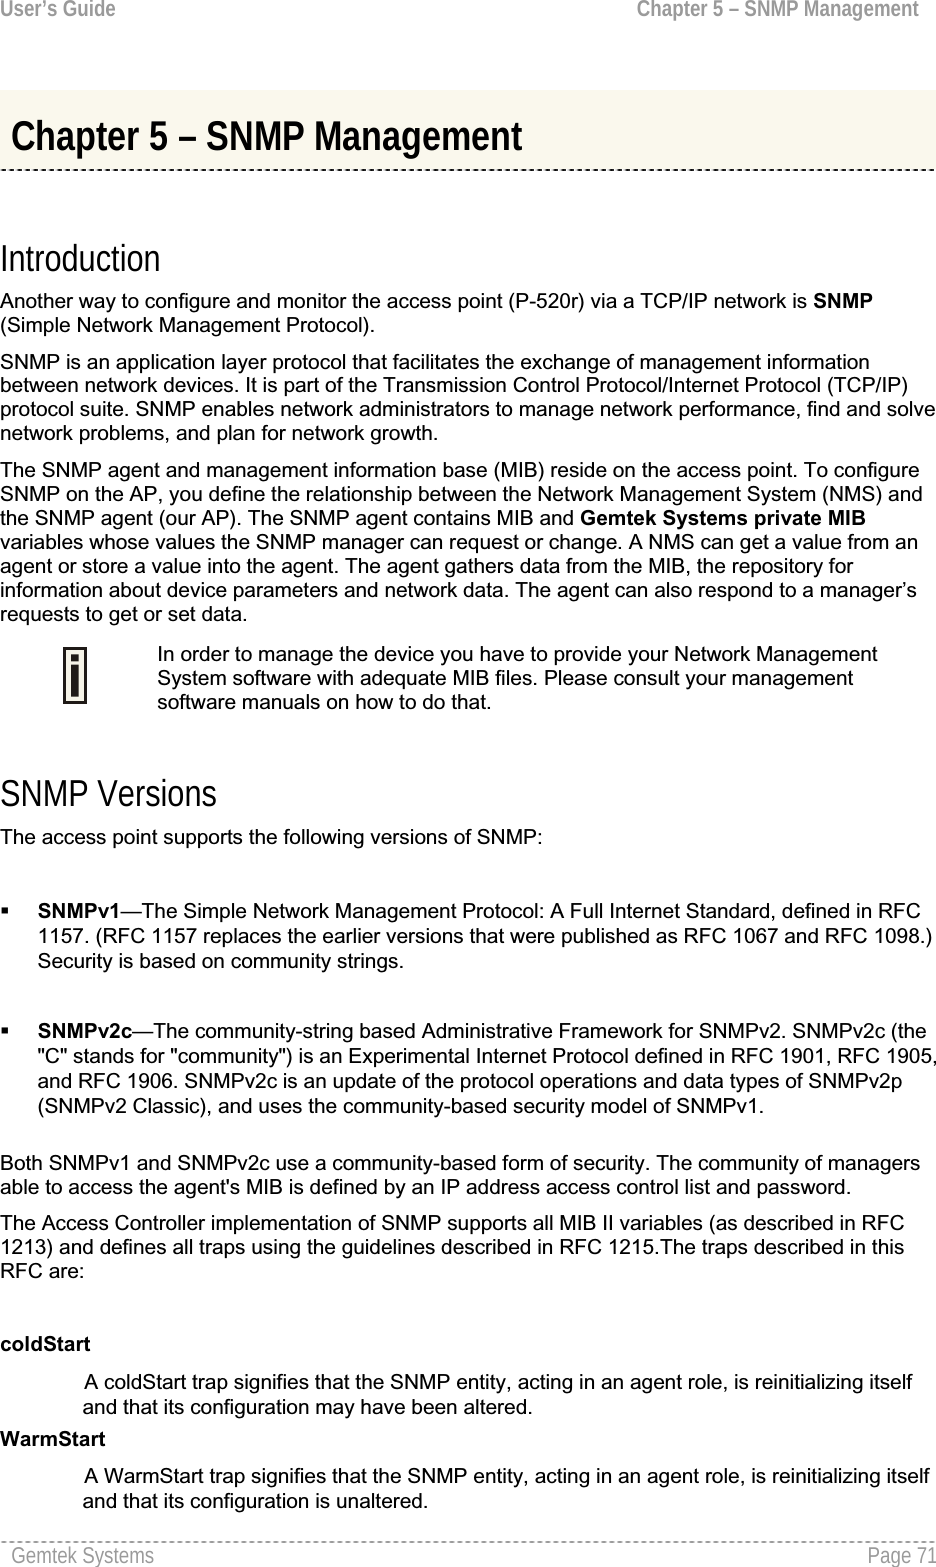 User’s Guide  Chapter 5 – SNMP ManagementChapter 5 – SNMP Management IntroductionAnother way to configure and monitor the access point (P-520r) via a TCP/IP network is SNMP(Simple Network Management Protocol).SNMP is an application layer protocol that facilitates the exchange of management informationbetween network devices. It is part of the Transmission Control Protocol/Internet Protocol (TCP/IP)protocol suite. SNMP enables network administrators to manage network performance, find and solve network problems, and plan for network growth.The SNMP agent and management information base (MIB) reside on the access point. To configureSNMP on the AP, you define the relationship between the Network Management System (NMS) and the SNMP agent (our AP). The SNMP agent contains MIB and Gemtek Systems private MIBvariables whose values the SNMP manager can request or change. A NMS can get a value from an agent or store a value into the agent. The agent gathers data from the MIB, the repository for information about device parameters and network data. The agent can also respond to a manager’srequests to get or set data.In order to manage the device you have to provide your Network ManagementSystem software with adequate MIB files. Please consult your managementsoftware manuals on how to do that. SNMP Versions The access point supports the following versions of SNMP:SNMPv1—The Simple Network Management Protocol: A Full Internet Standard, defined in RFC 1157. (RFC 1157 replaces the earlier versions that were published as RFC 1067 and RFC 1098.)Security is based on community strings.SNMPv2c—The community-string based Administrative Framework for SNMPv2. SNMPv2c (the&quot;C&quot; stands for &quot;community&quot;) is an Experimental Internet Protocol defined in RFC 1901, RFC 1905,and RFC 1906. SNMPv2c is an update of the protocol operations and data types of SNMPv2p (SNMPv2 Classic), and uses the community-based security model of SNMPv1. Both SNMPv1 and SNMPv2c use a community-based form of security. The community of managersable to access the agent&apos;s MIB is defined by an IP address access control list and password. The Access Controller implementation of SNMP supports all MIB II variables (as described in RFC 1213) and defines all traps using the guidelines described in RFC 1215.The traps described in this RFC are:coldStartA coldStart trap signifies that the SNMP entity, acting in an agent role, is reinitializing itself and that its configuration may have been altered.WarmStartA WarmStart trap signifies that the SNMP entity, acting in an agent role, is reinitializing itself and that its configuration is unaltered.Gemtek Systems  Page 71